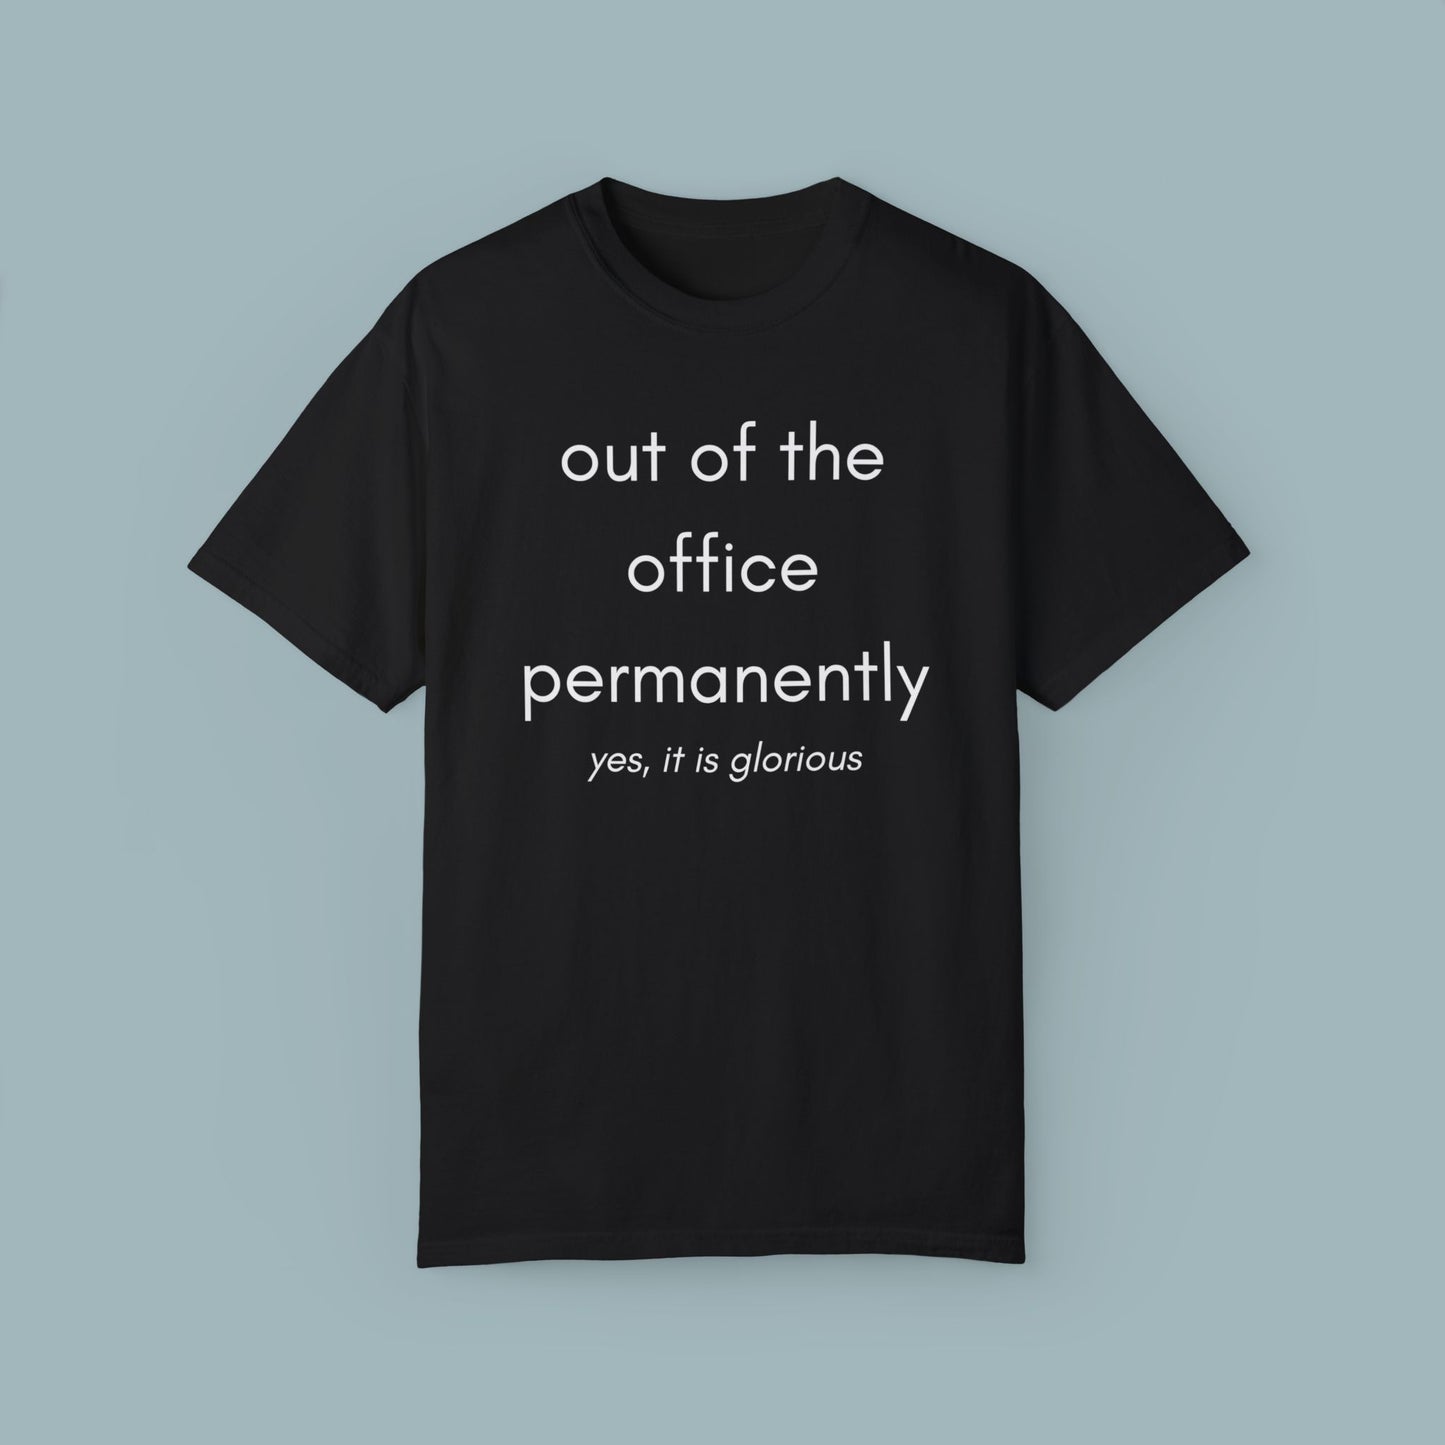 Retirement is a beautiful stage in life celebrated on this black only Unisex Garment-Dyed T-shirt. Great gift or get one for yourself.